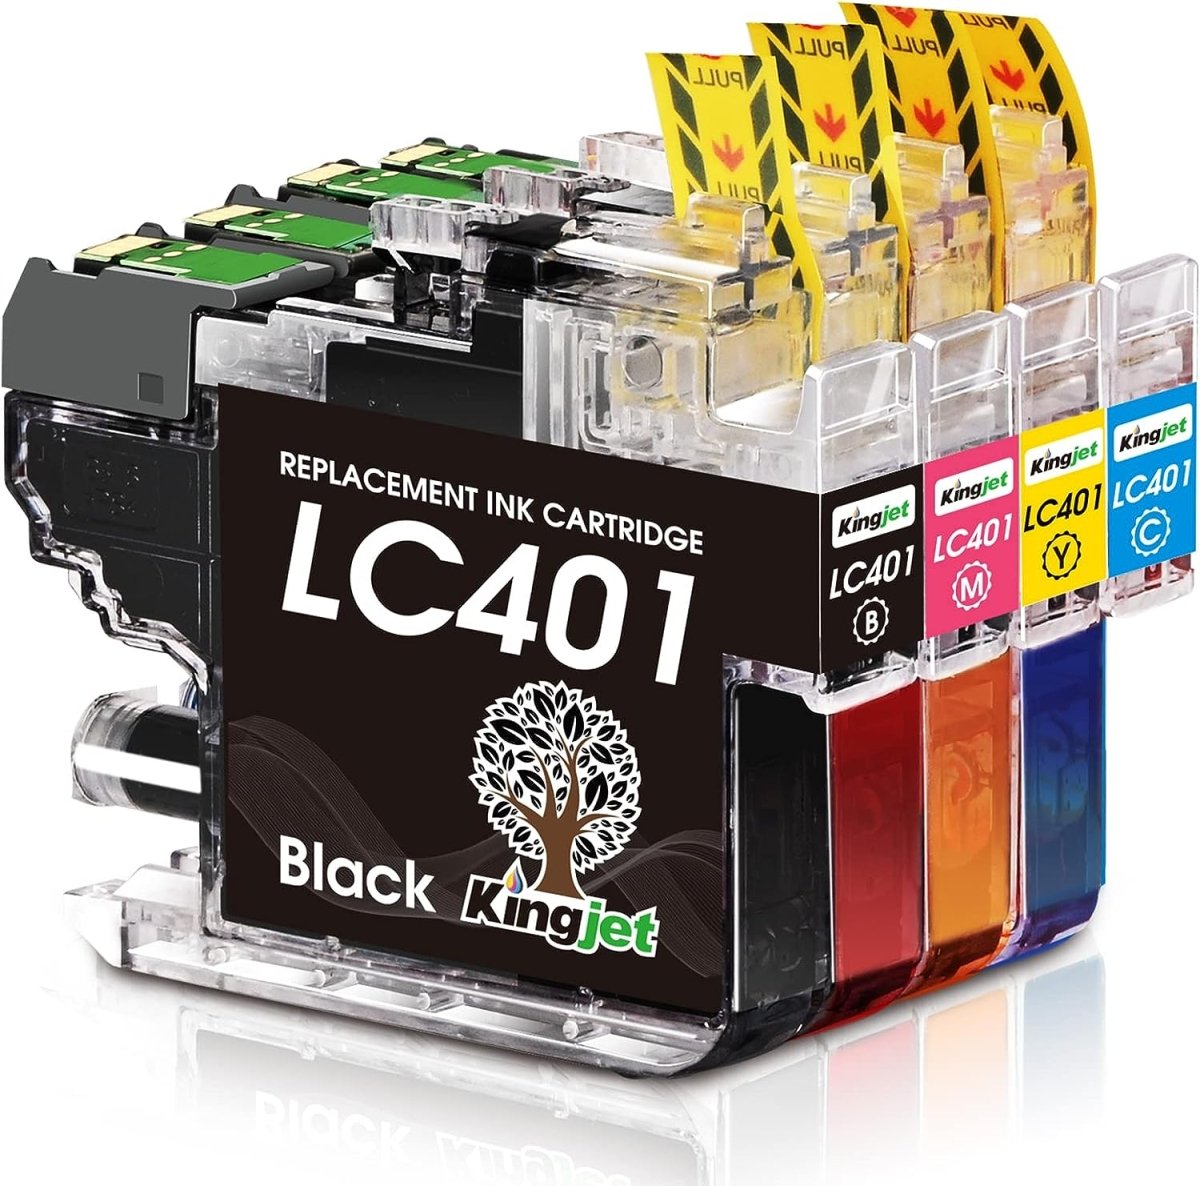  LC401XL Ink Cartridges for Brother Printer Replacement